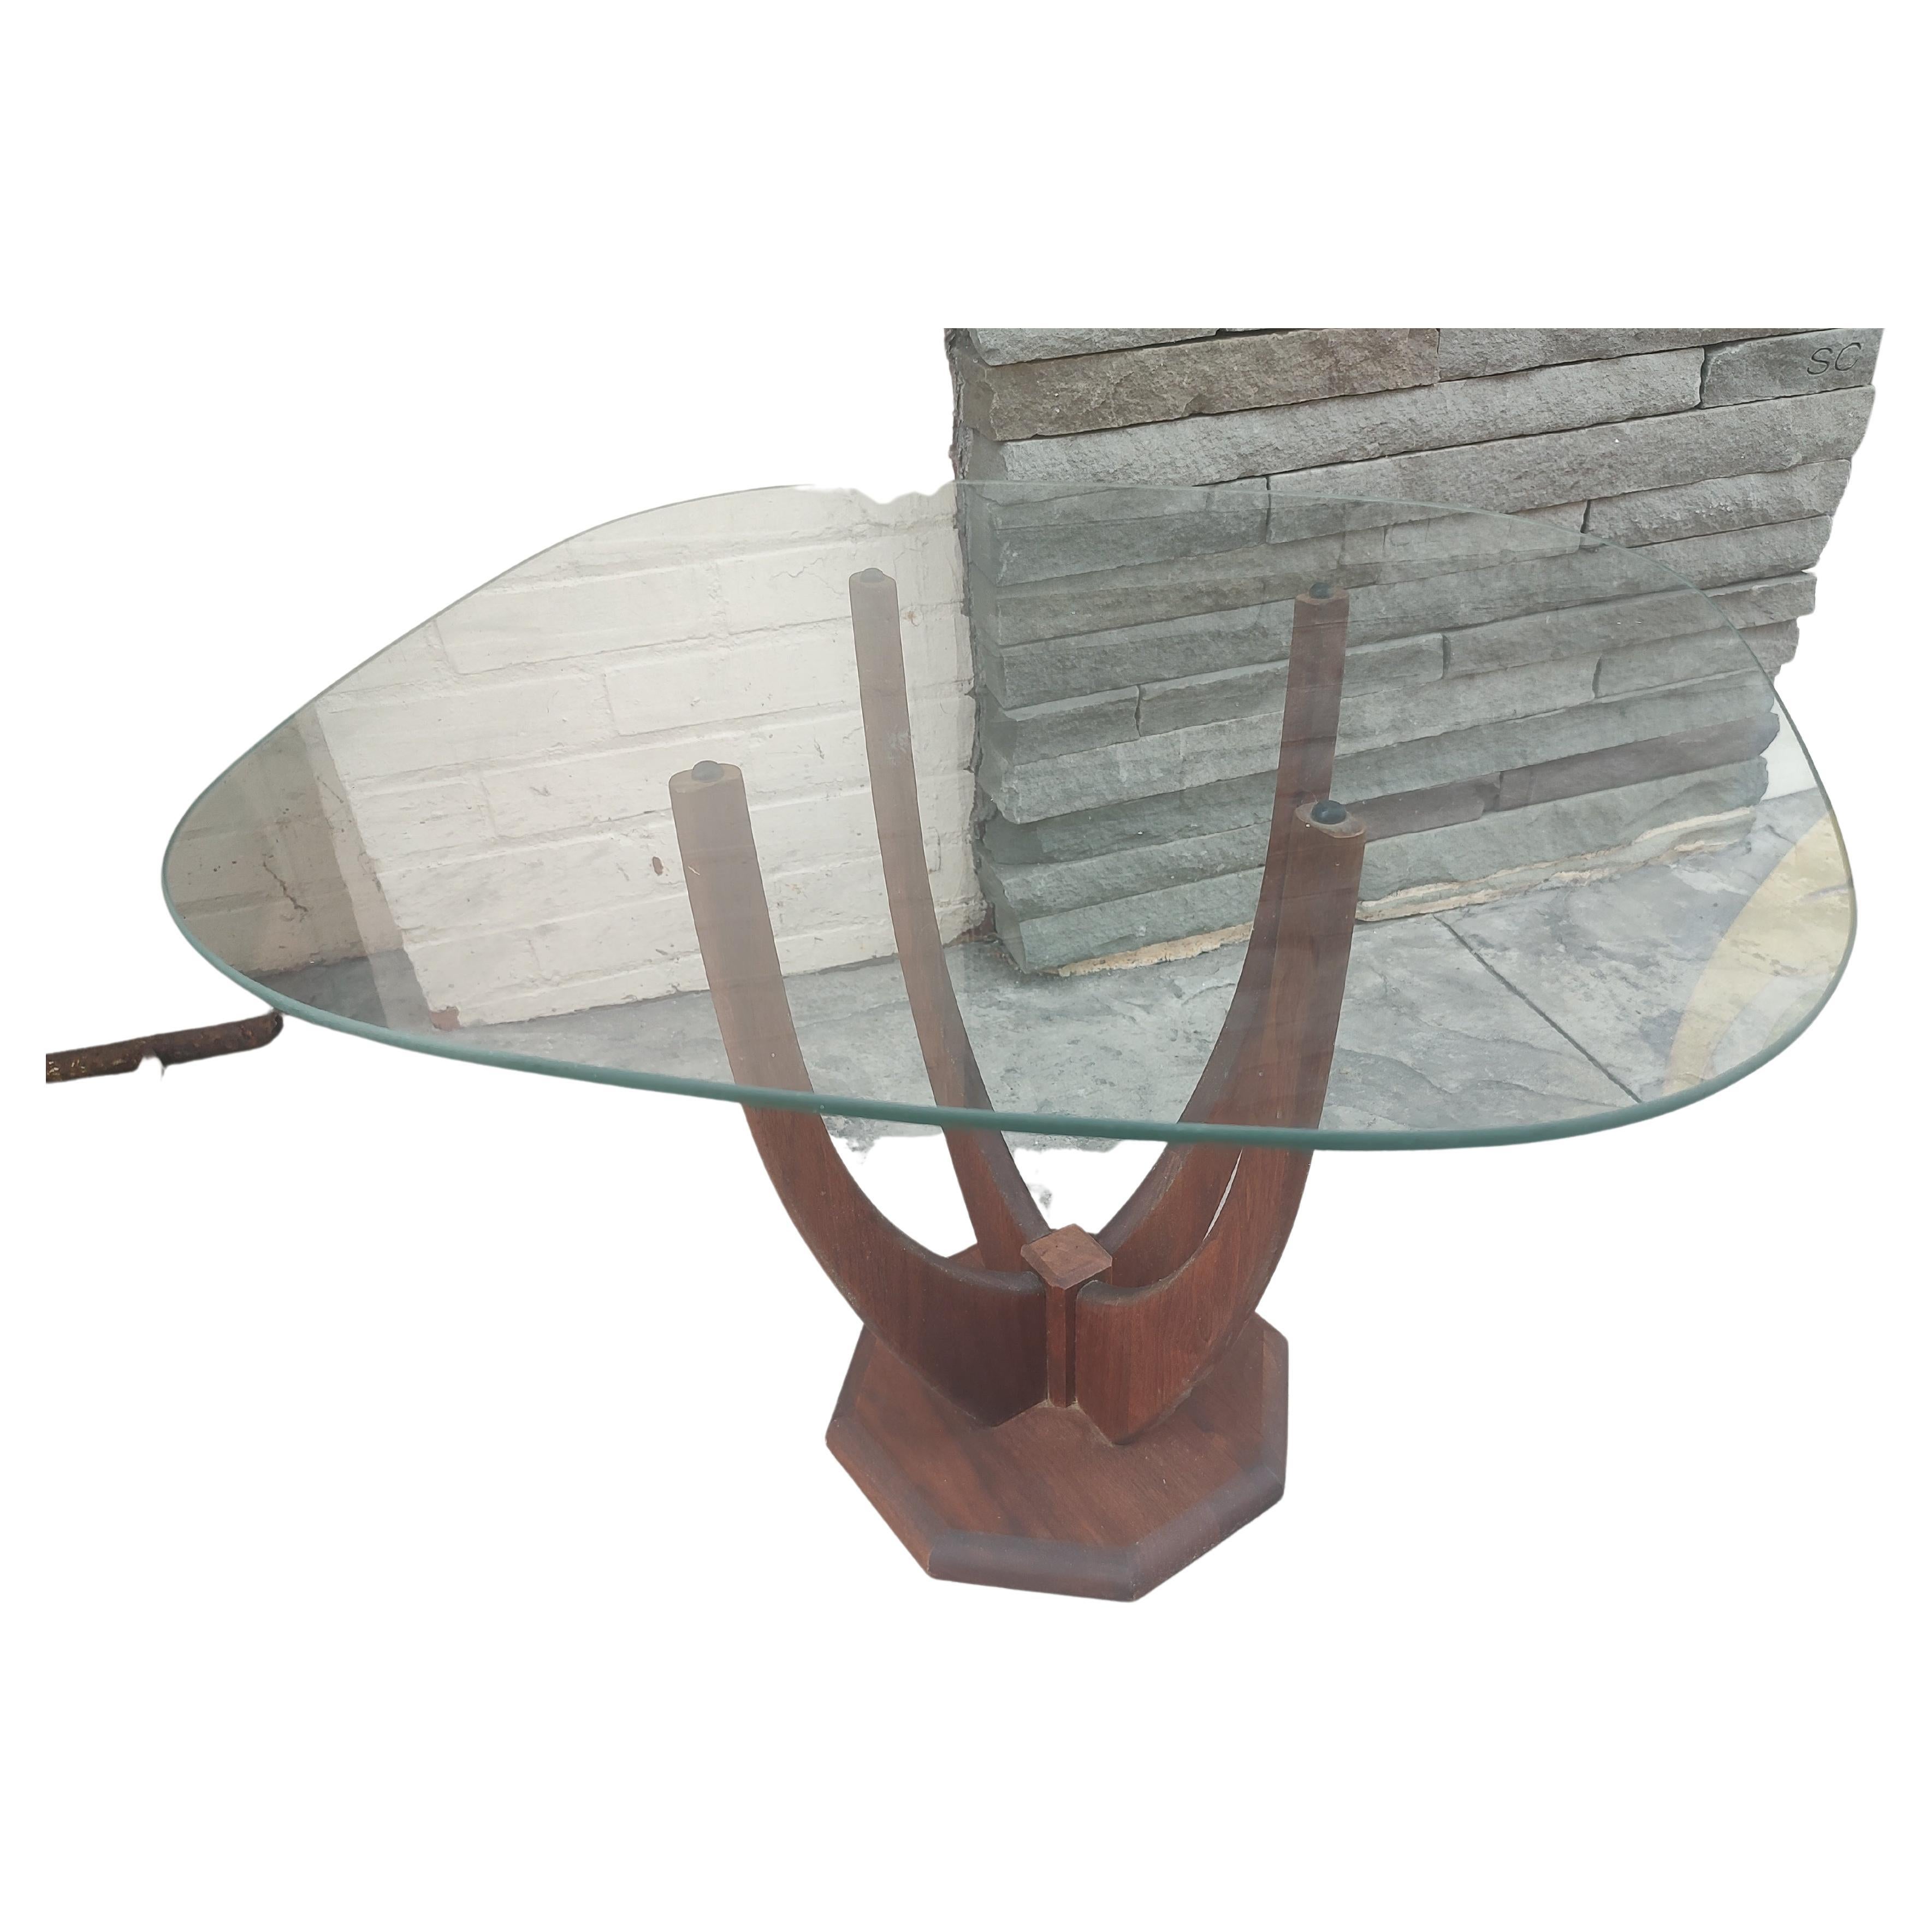 Simple yet rare stylized table by Adrian Pearsall in Walnut with a square piece of glass on top. Base actually looks like it should be reversed but it is correct in shown position. In excellent vintage condition with minimal wear. Glass is perfect.